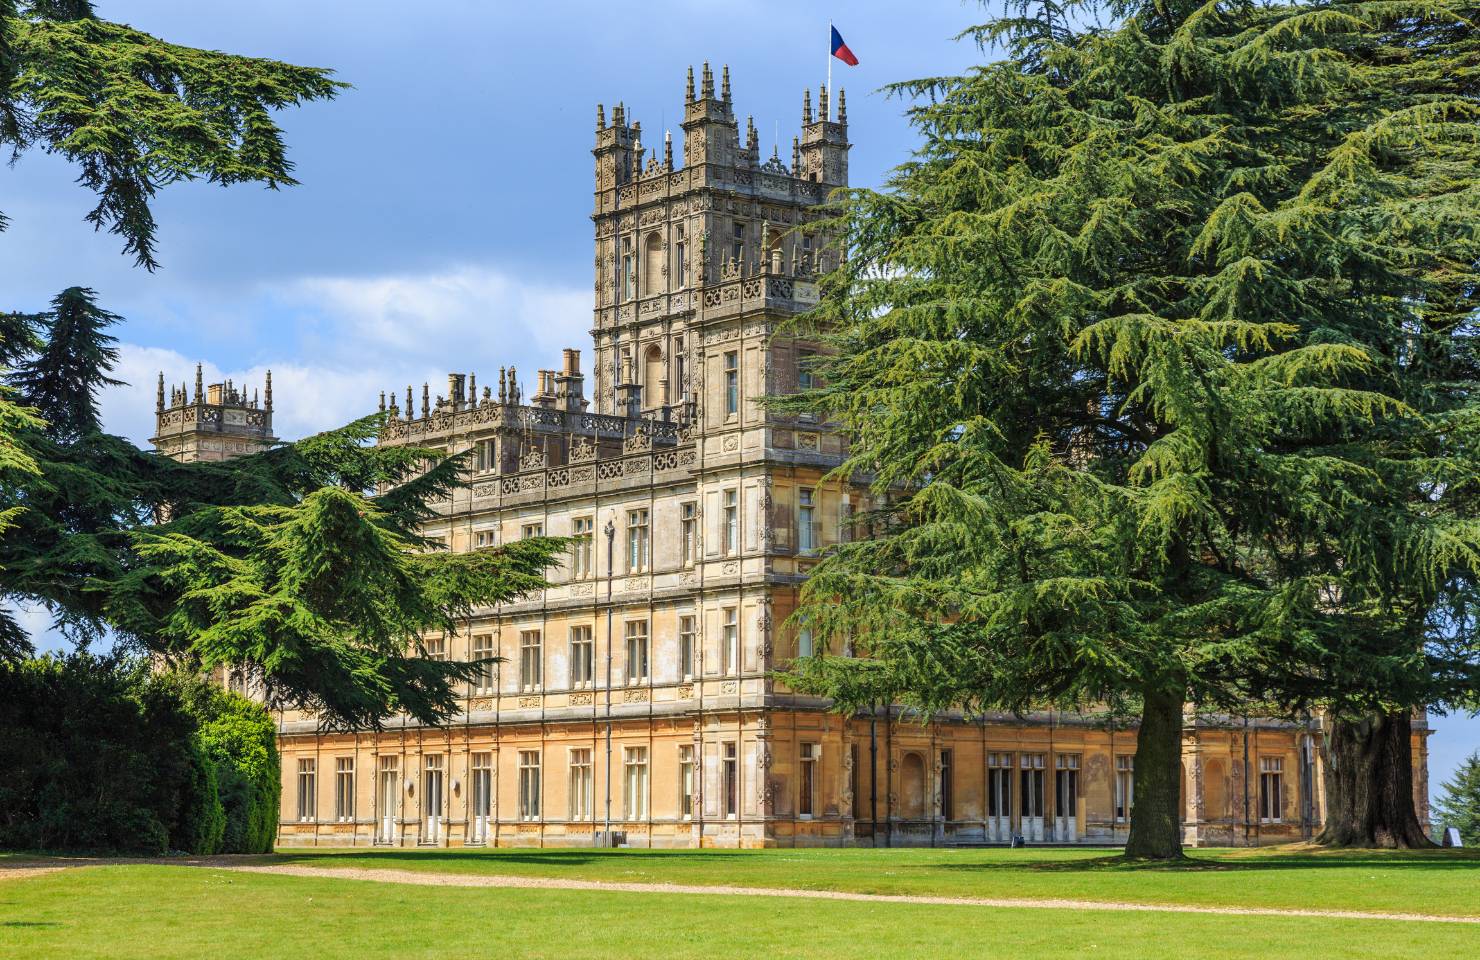 Highclere Castle from Downton Abbey